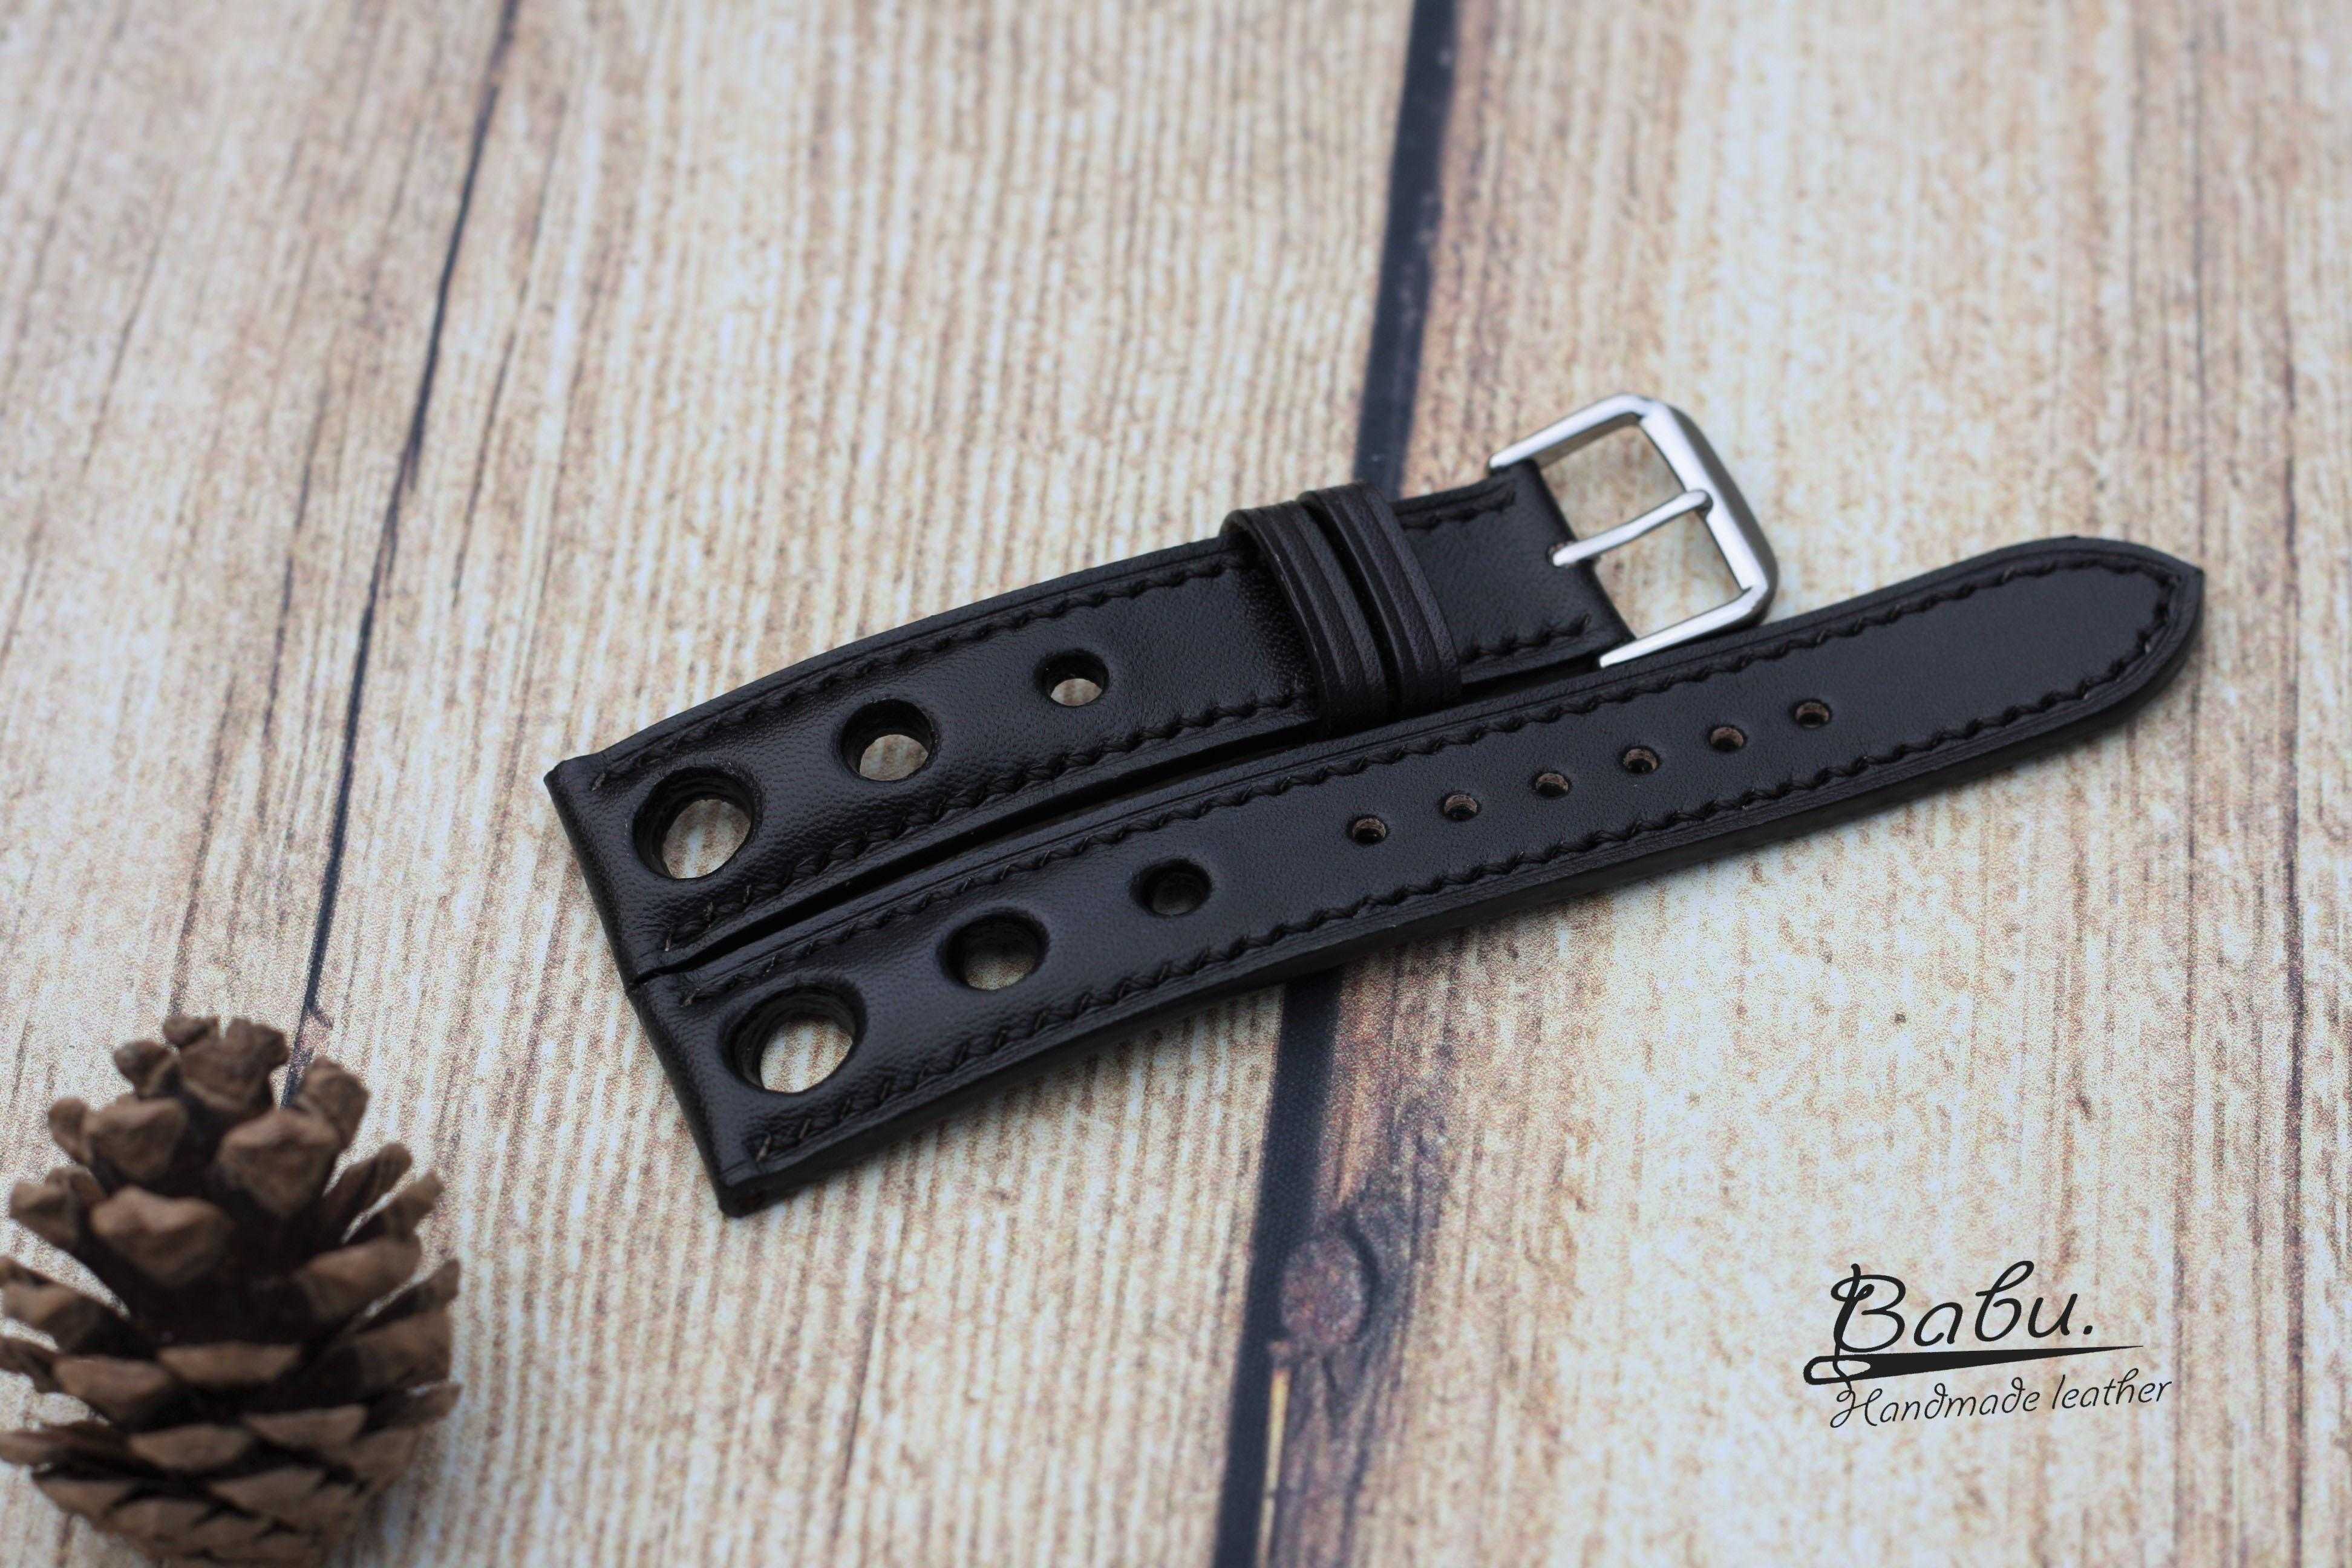 Tan Vachetta leather watch strap, Cowhide leather watch band SW059